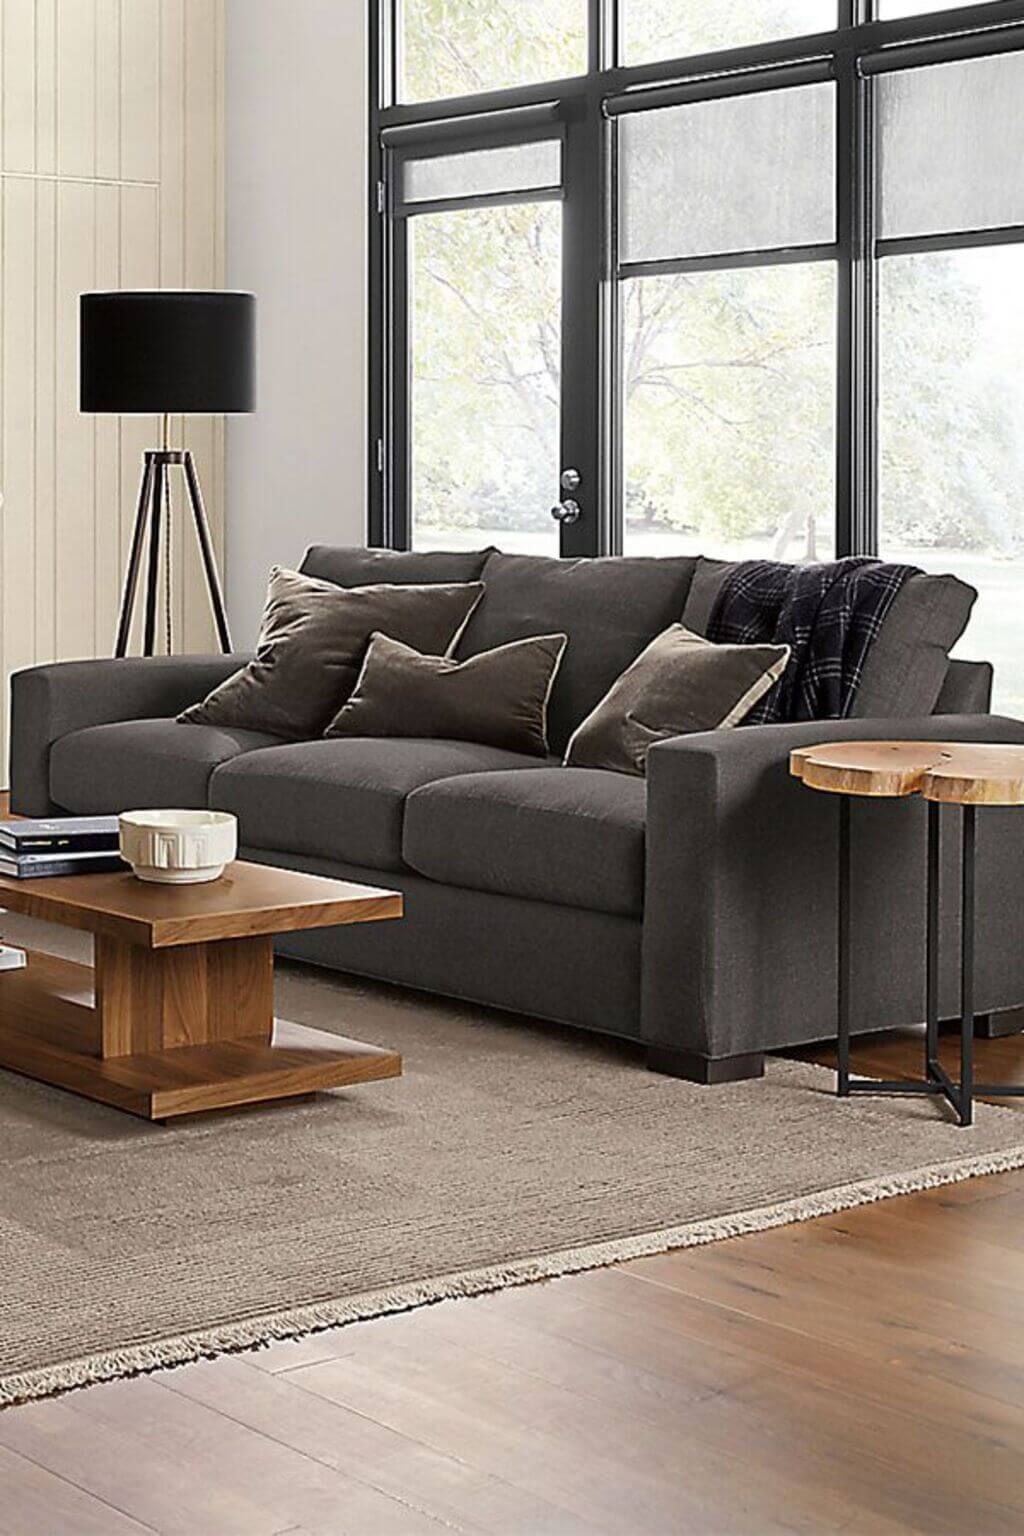 Things to Consider Before Buying a Sofa or Lounges 